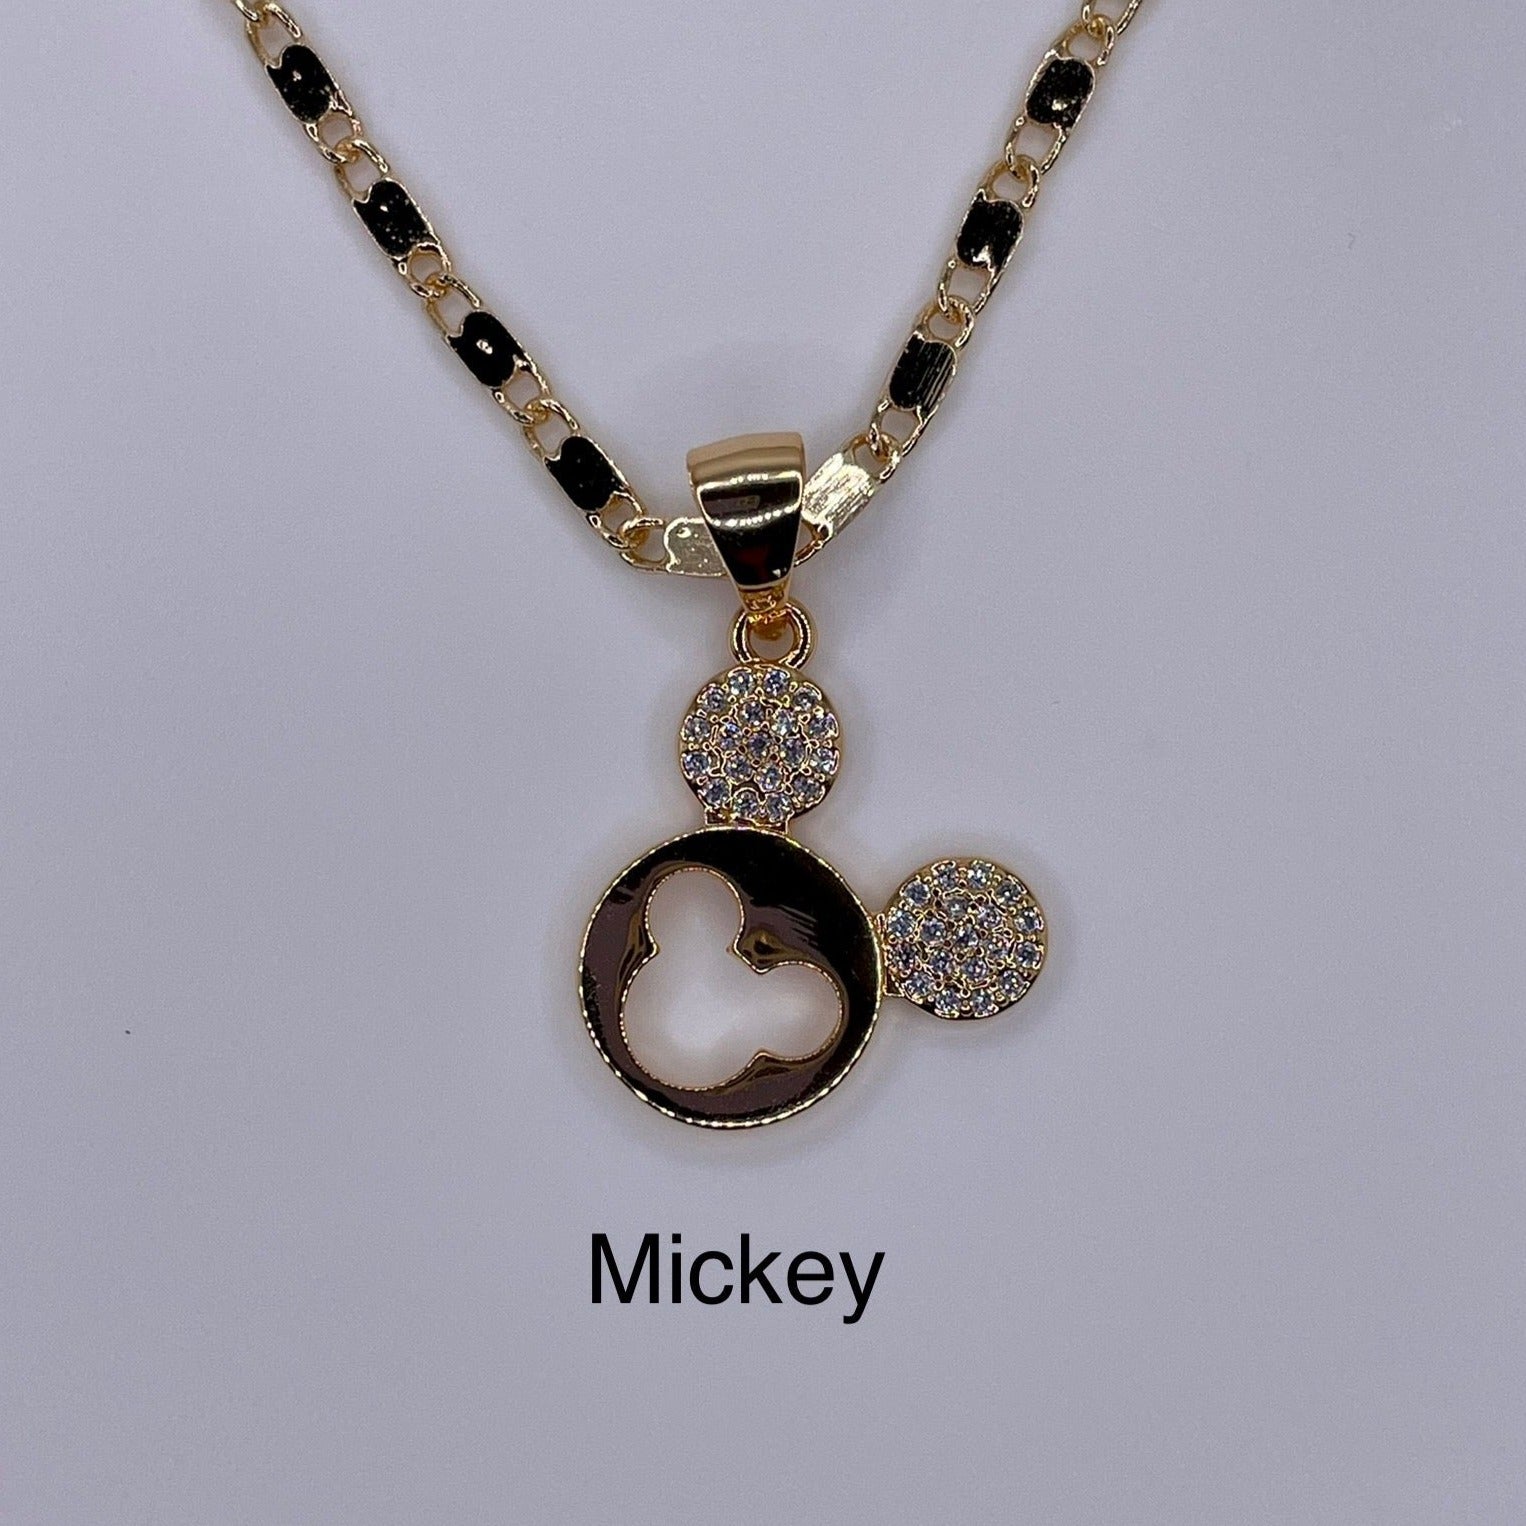 Mickey mouse pendant being displayed. Gold plated mickey mouse pendant.